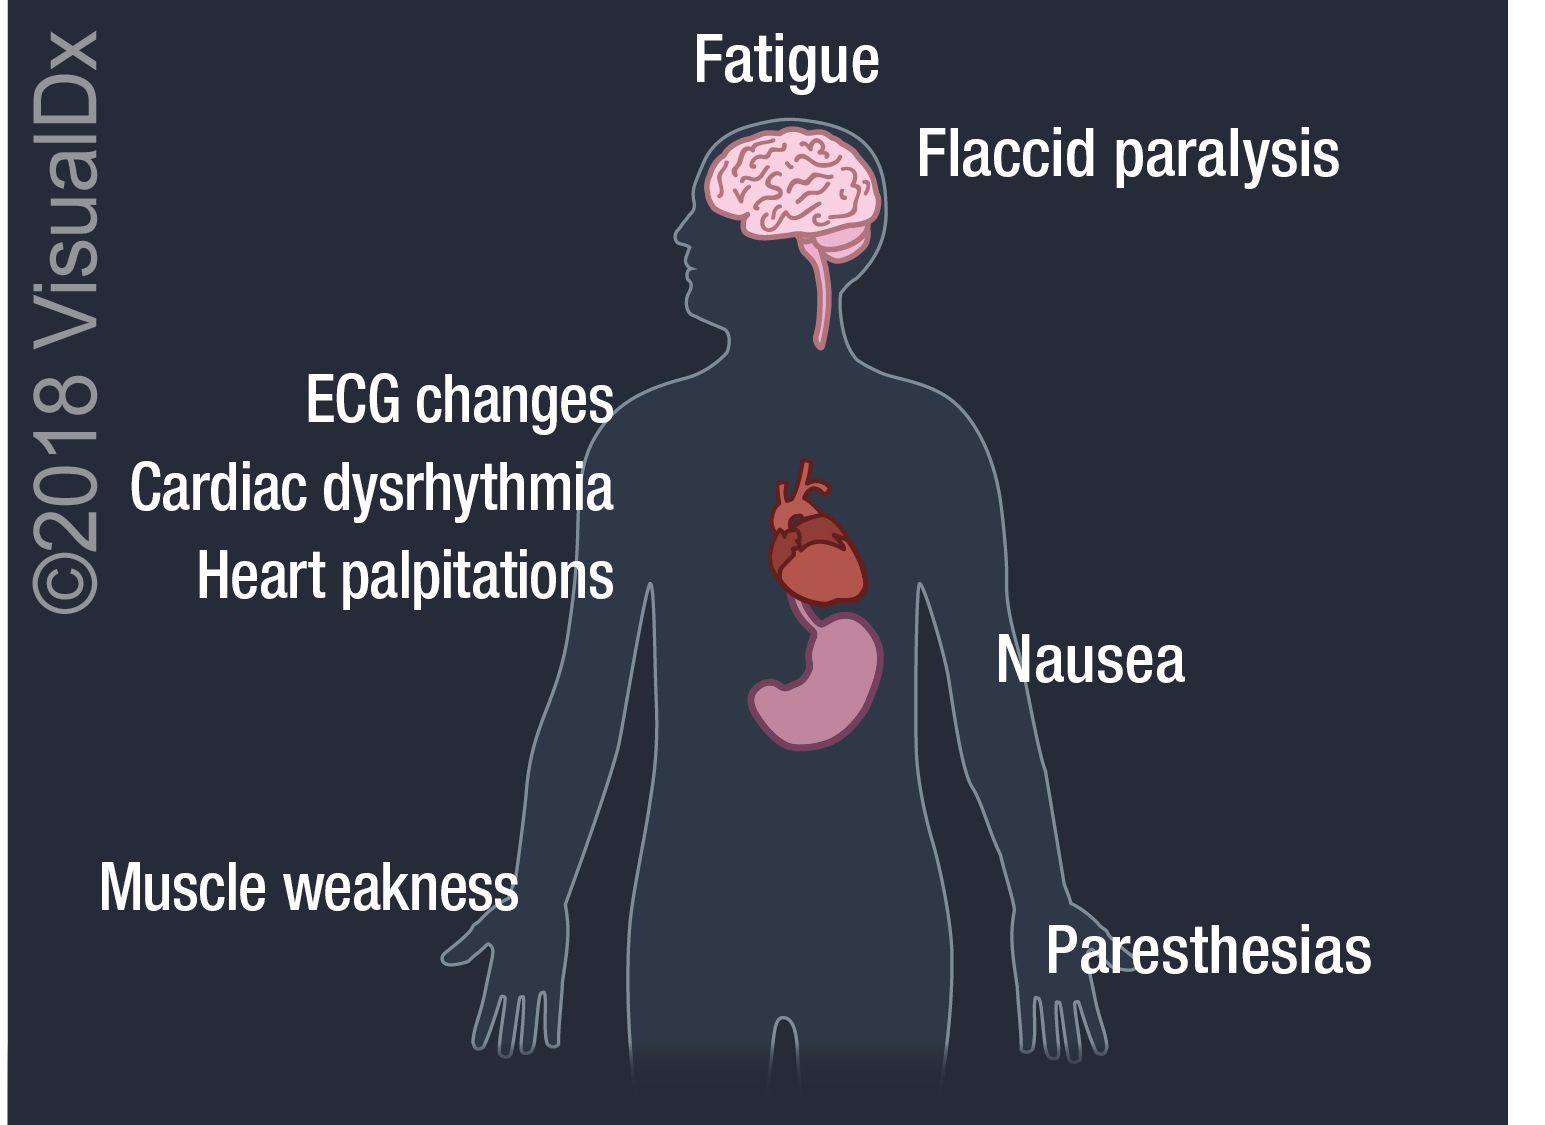 can undiagnosed diabetes cause heart palpitations